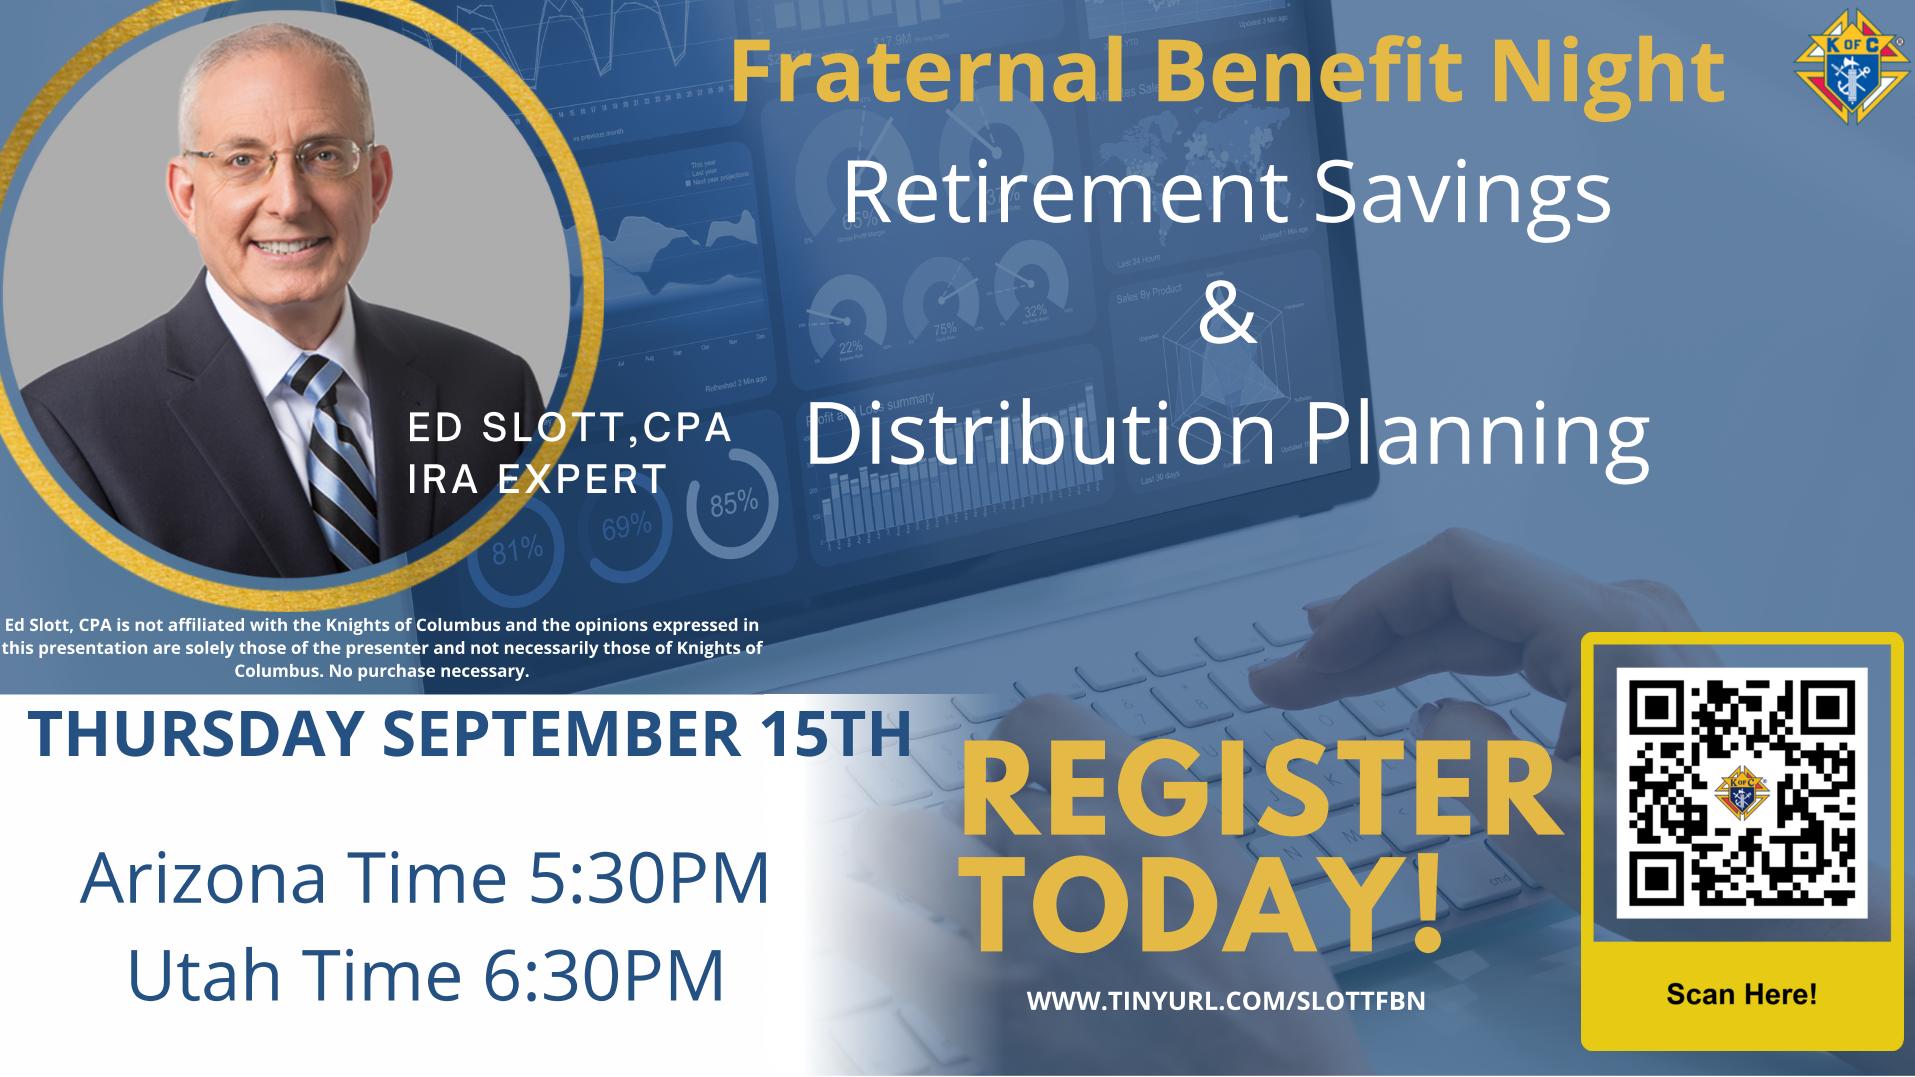 Retirement Savings and Distribution Planning with Ed Slott - Fraternal Benefit Night Image